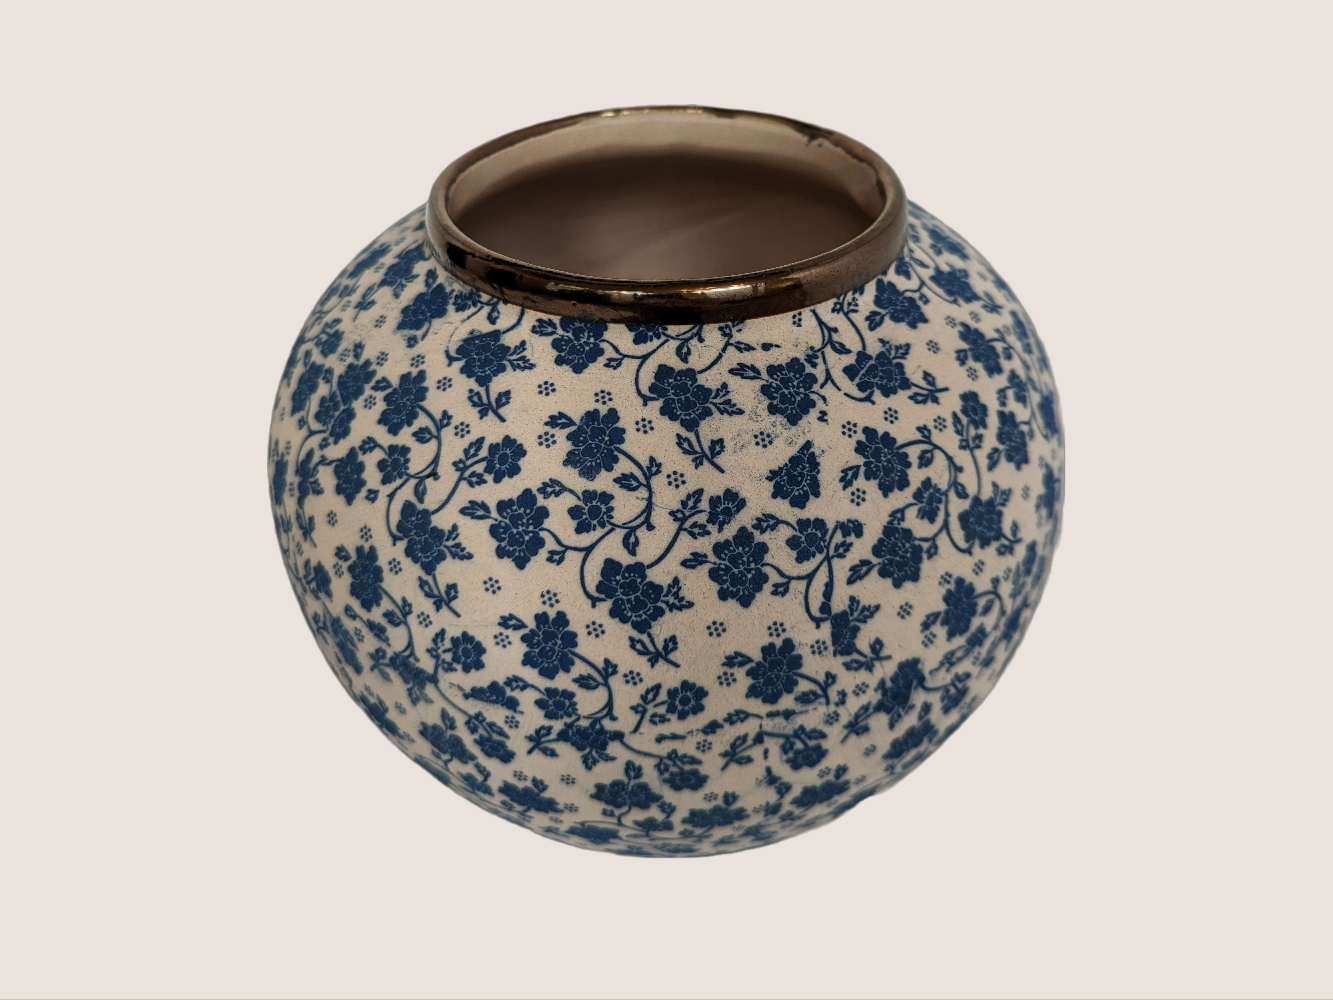 Round ivory and blue floral decal vase with gold rim accent for home decor. Features underglaze effect and matte finish.